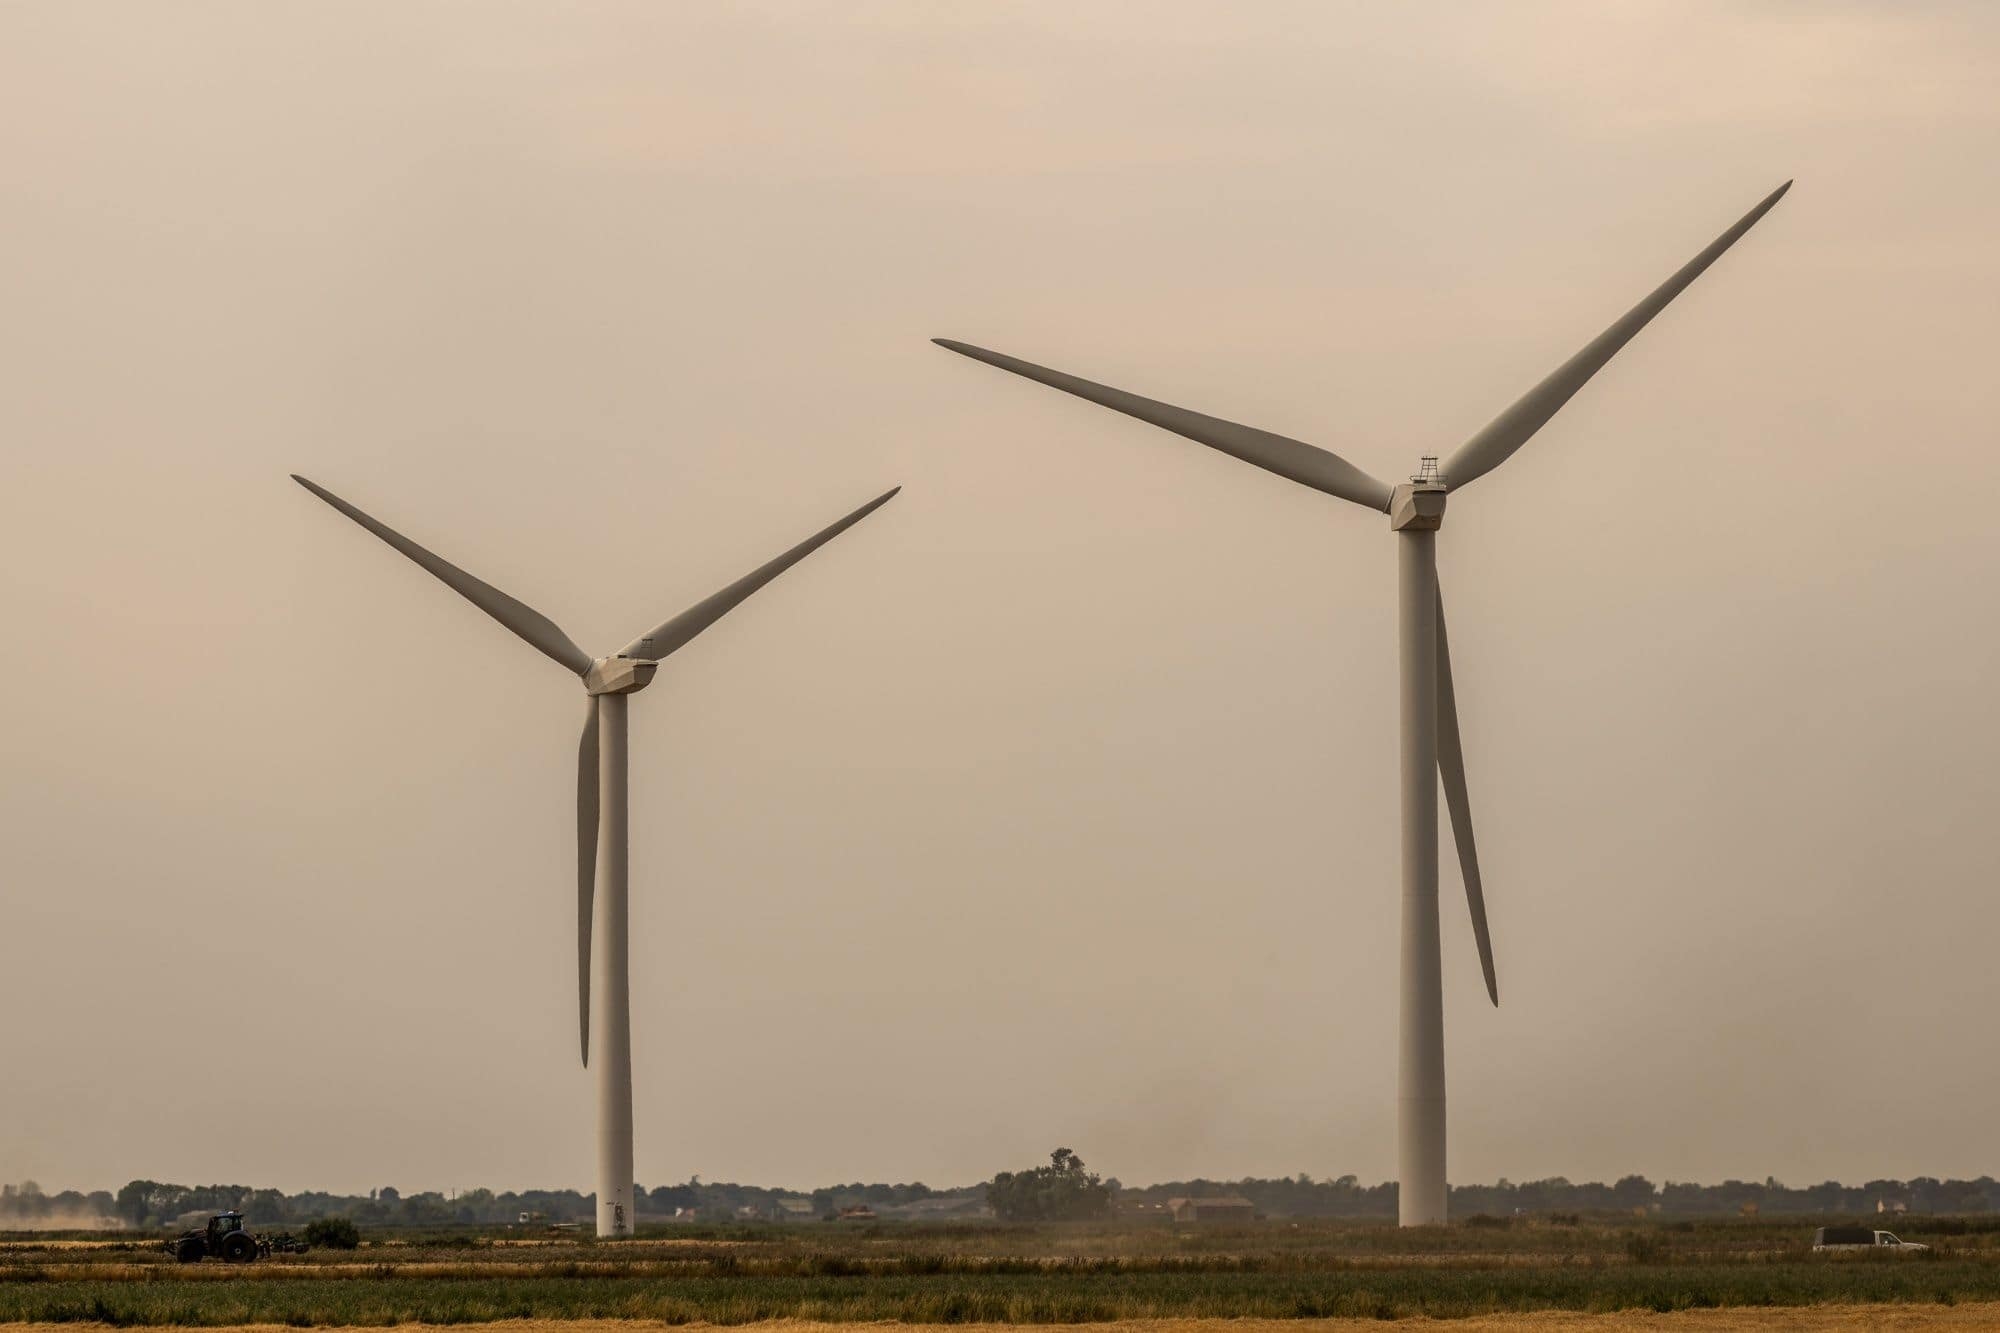 In the last one year, Suzlon Energy has outperformed Inox Wind.